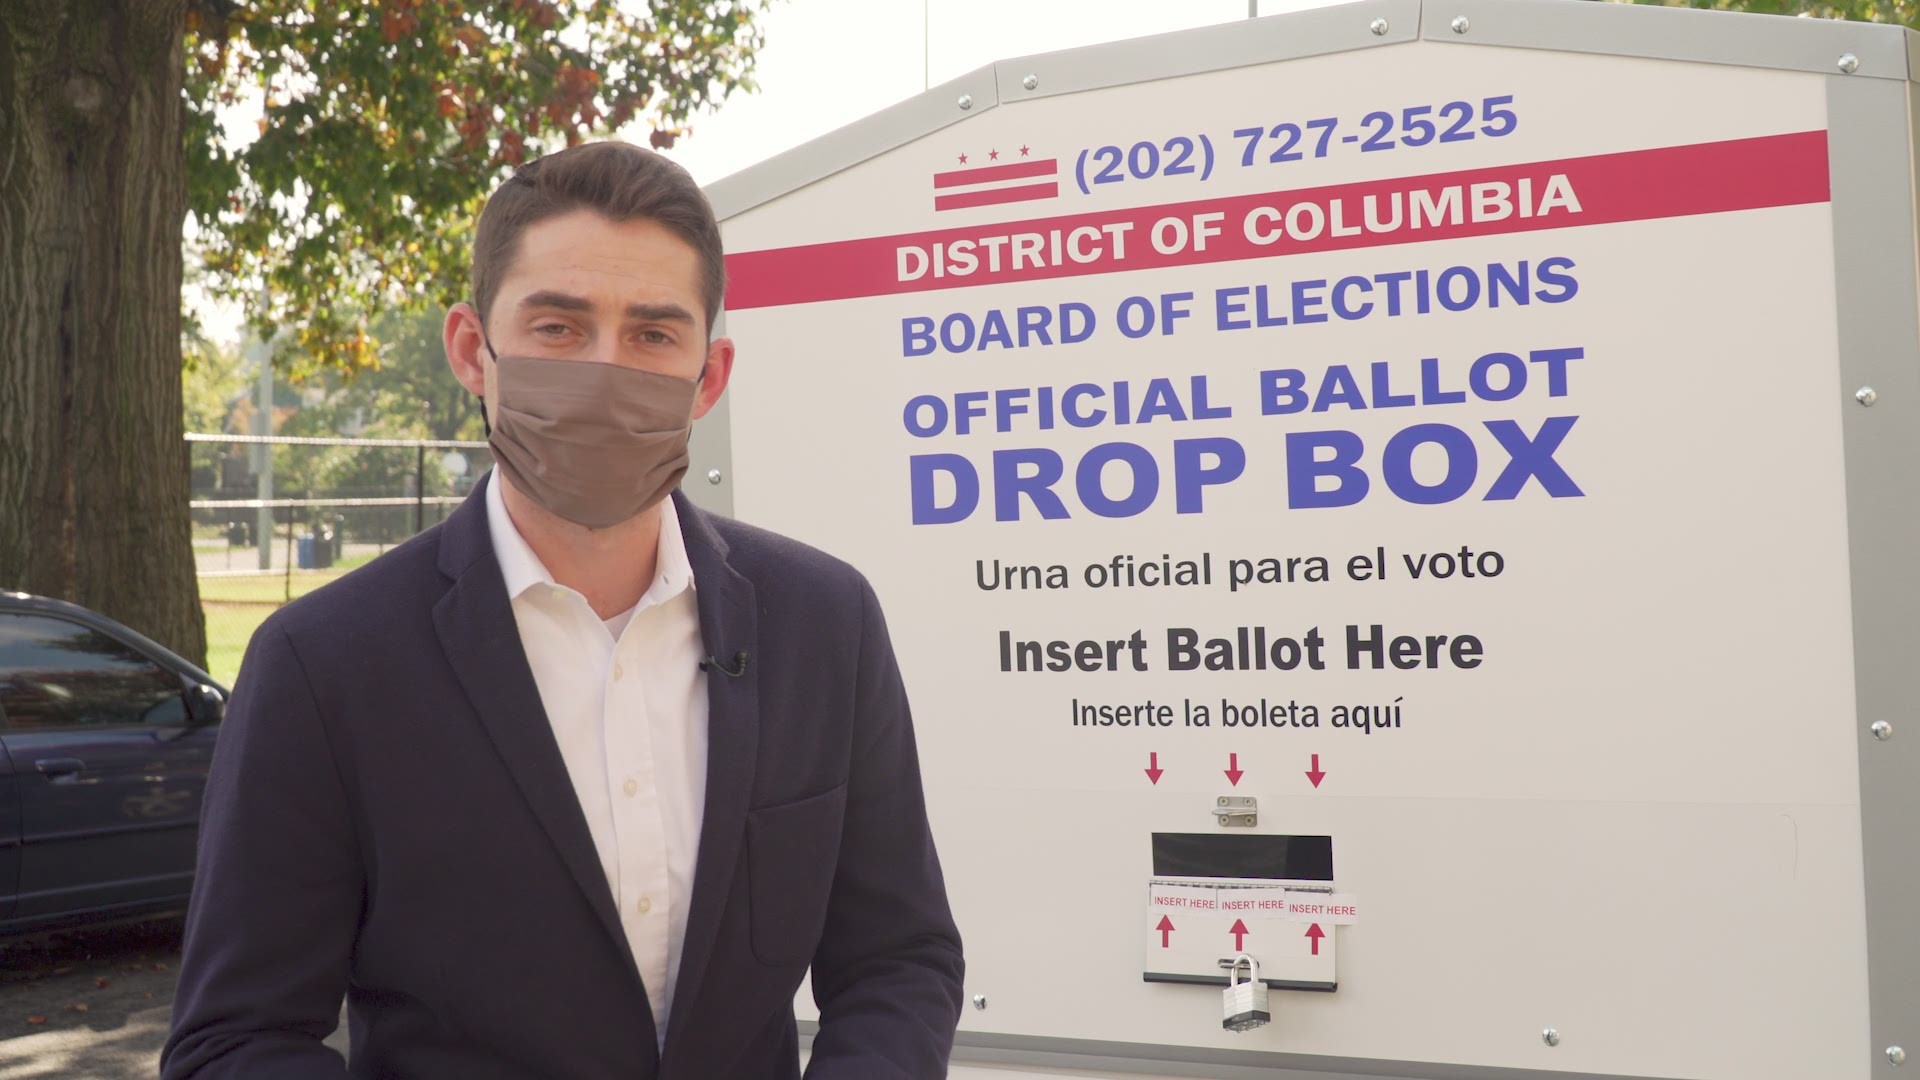 The Verify team takes a skeptical viewer through the drop box ballot collection process to separate rumor from reality and show how votes get counted.